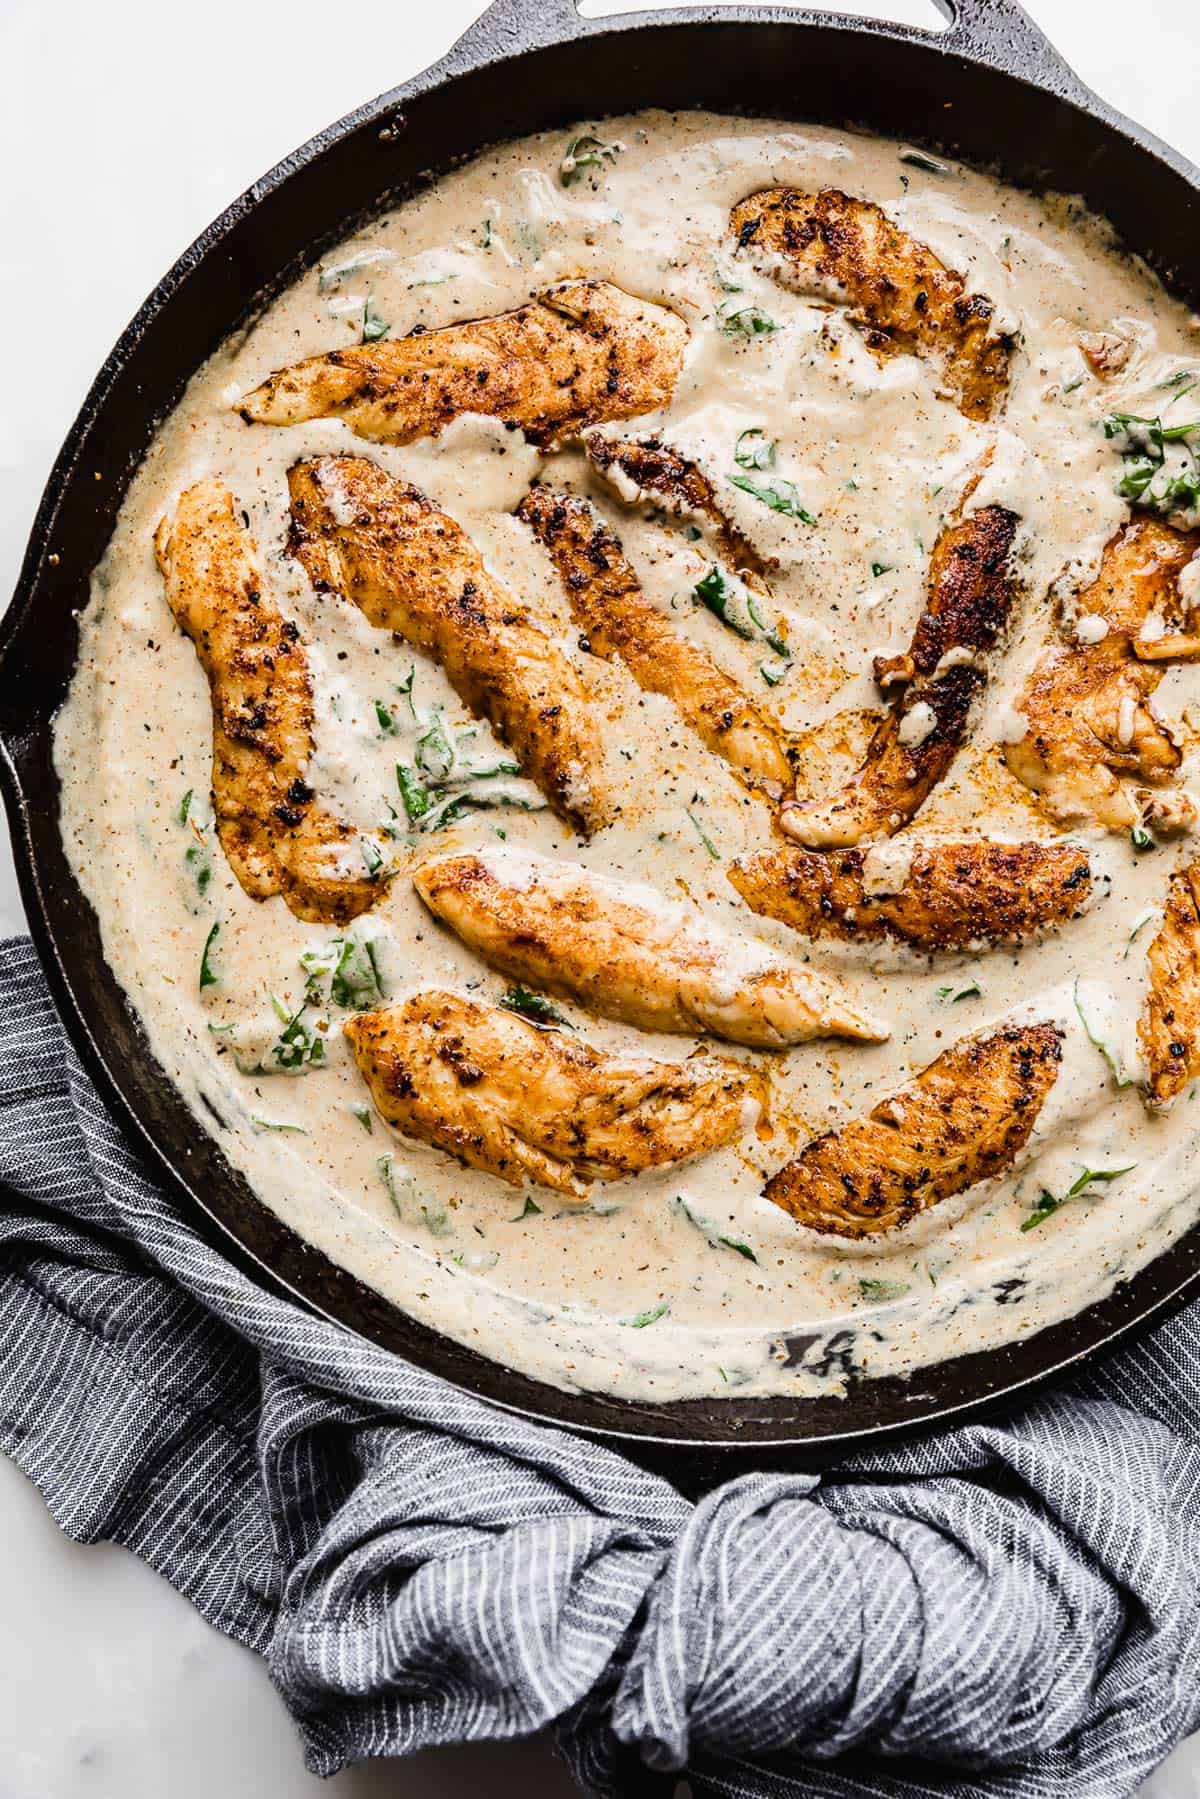 A black cast iron skillet full of a Creamy Tuscan Chicken Recipe swimming in a tan colored gravy.